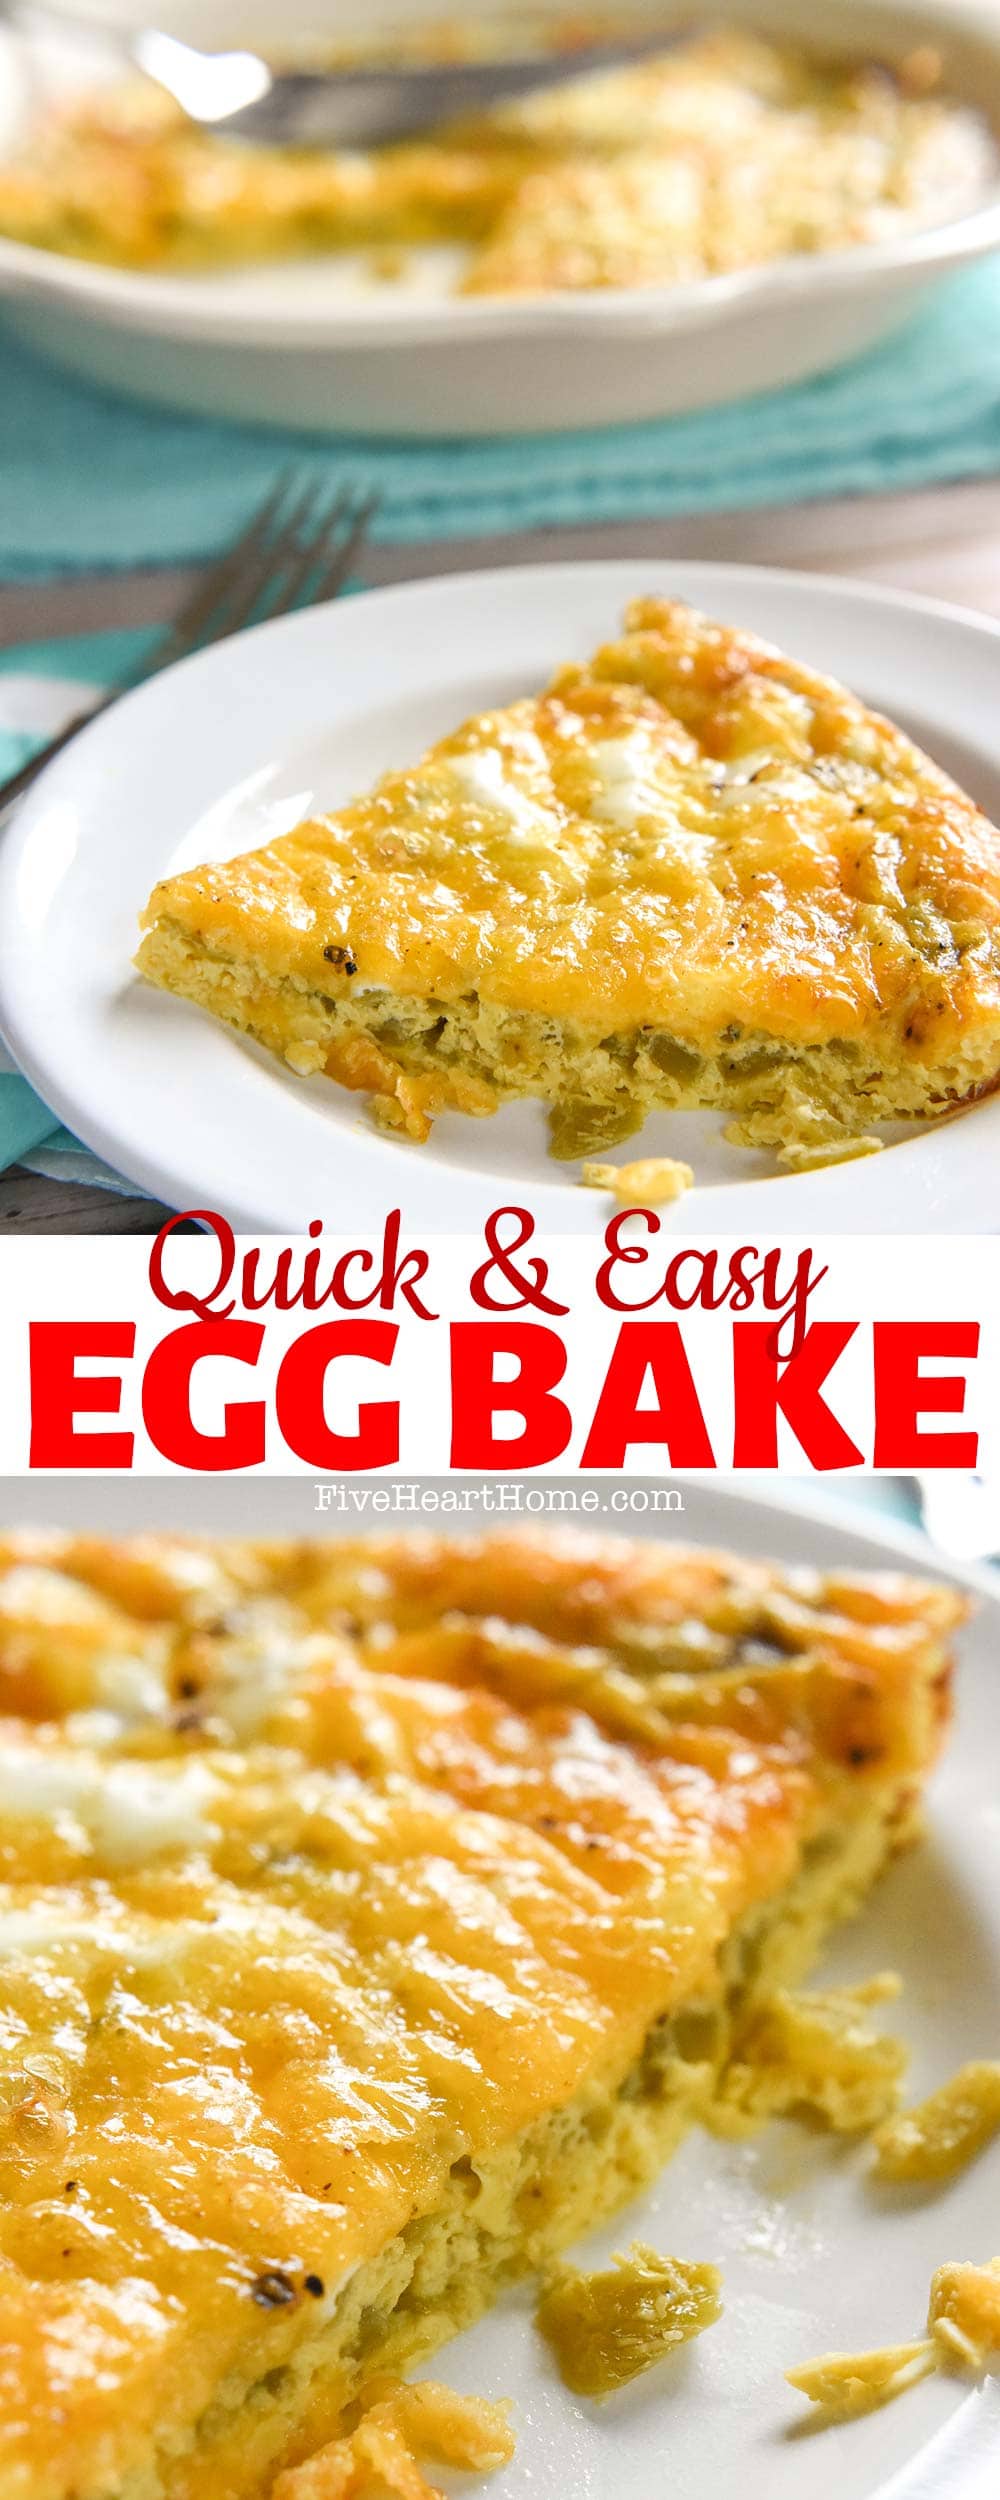 Easy Egg Bake ~ this flavorful, crustless egg bake recipe is loaded with cheddar cheese and (optional) green chiles for a quick, easy breakfast that's perfect for serving to overnight houseguests or hungry family members any morning of the week! | FiveHeartHome.com via @fivehearthome